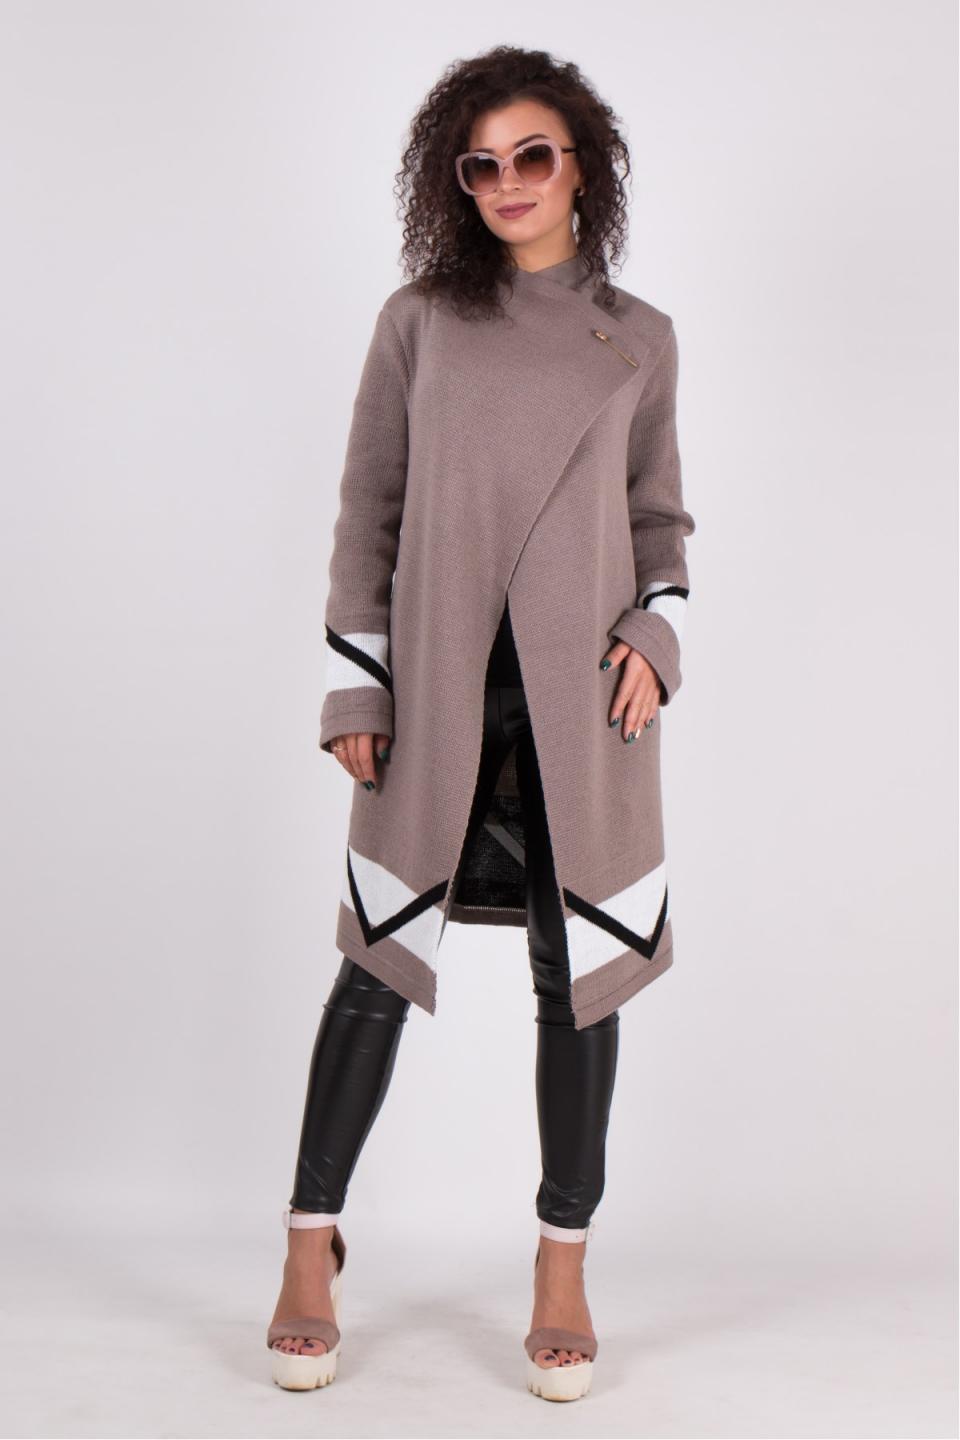 Warm knitted cardigan &quot;Deniza&quot; (cappuccino, white, black)